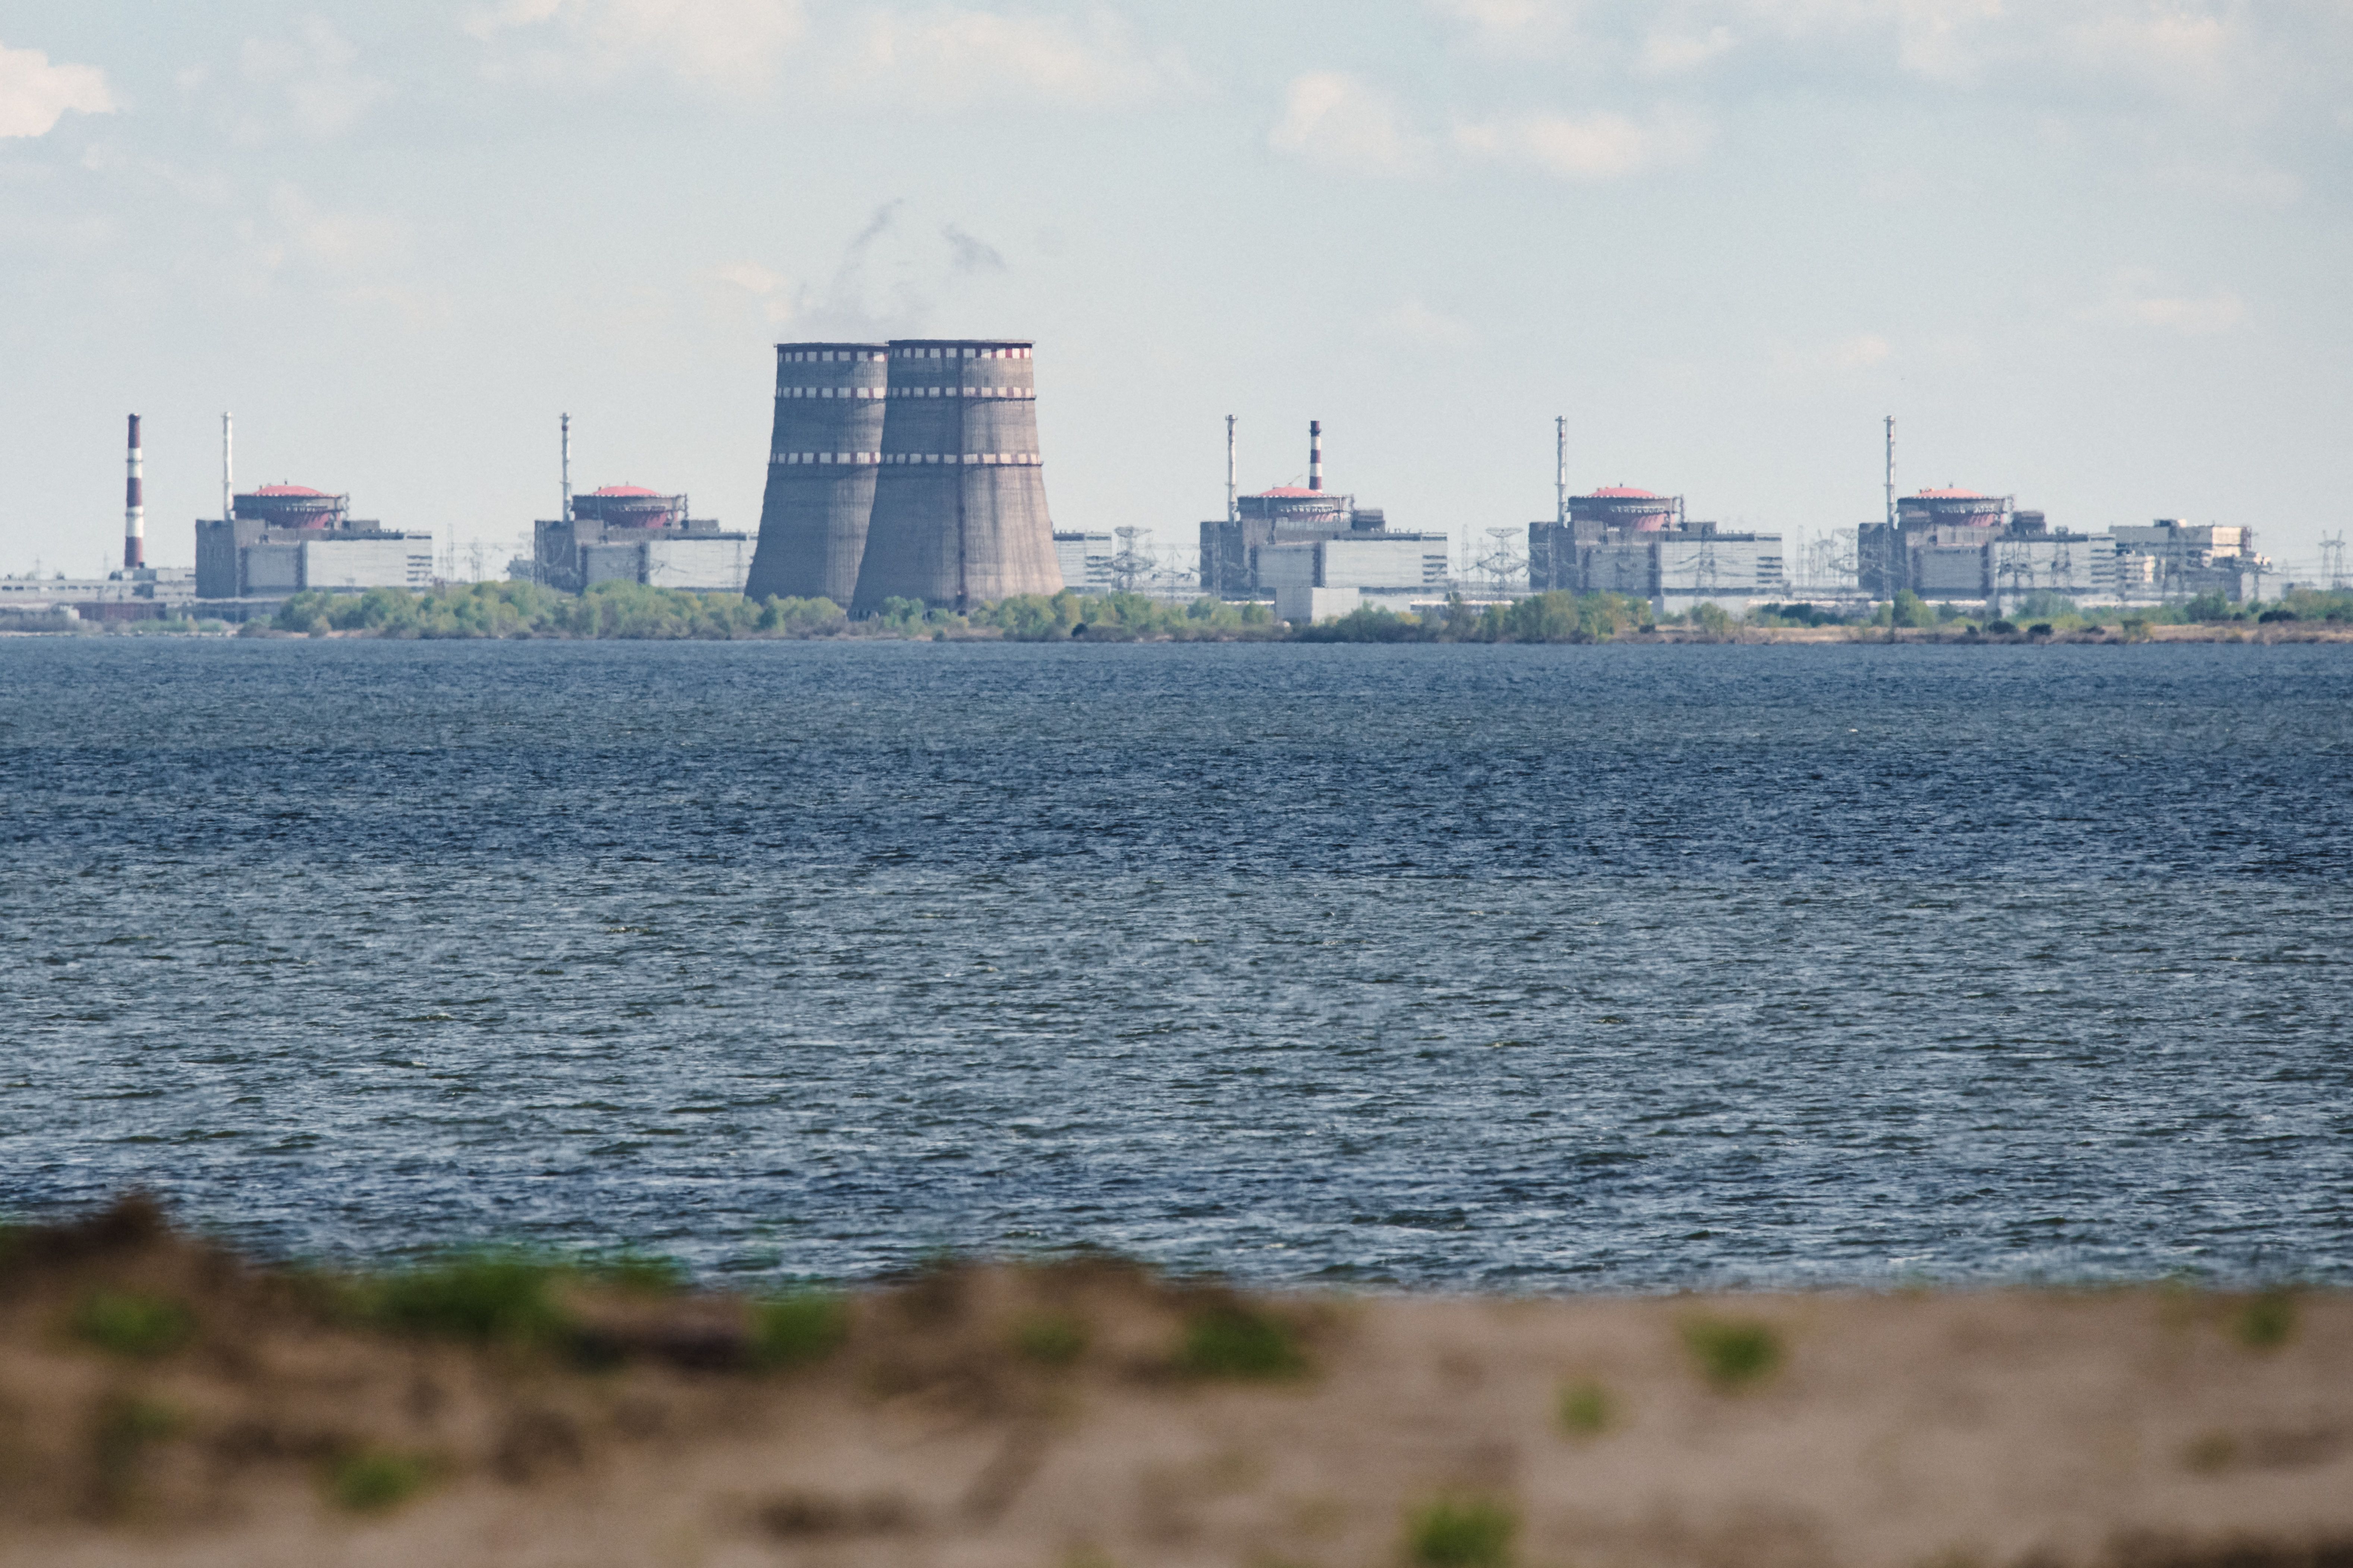 A general view shows the Zaporizhzhia nuclear power plant, located in the Russian-controlled area of ​​Enerhodar, as seen from Nikopol on April 27, 2022.